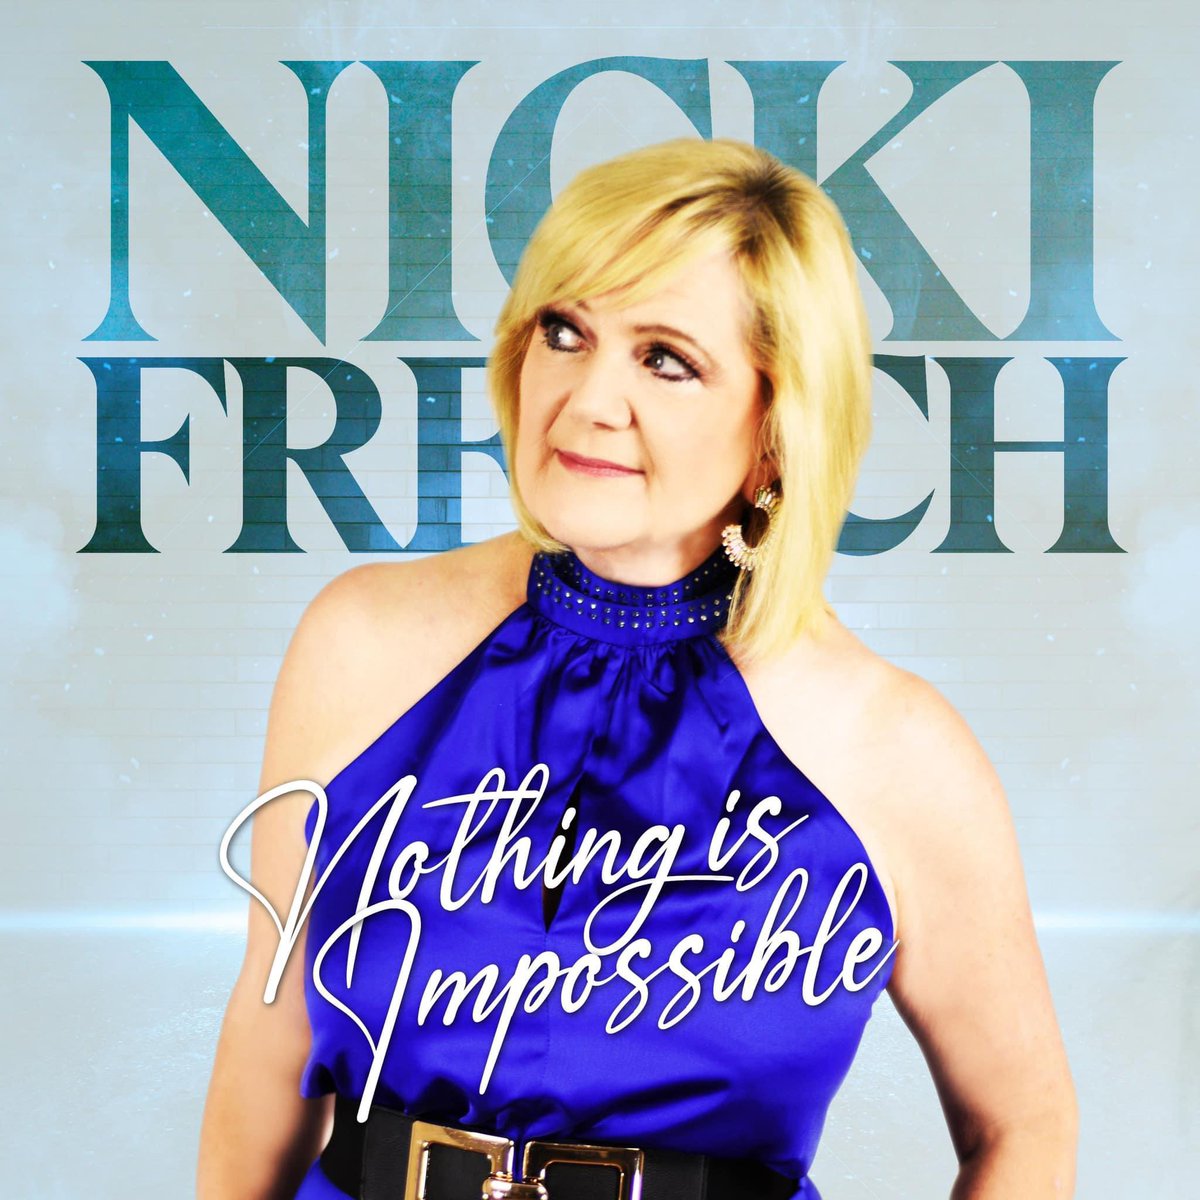 The very lovely @NickiFrenchie is releasing her brand new single, “Nothing is Impossible”, on @Energise on 19th April. It’s a beautiful, uplifting Abba-esque song written by Gordon Pogoda & JasonBlume, and produced by @MattPopOfficial. All formats include my dance remixes! 🪩✨